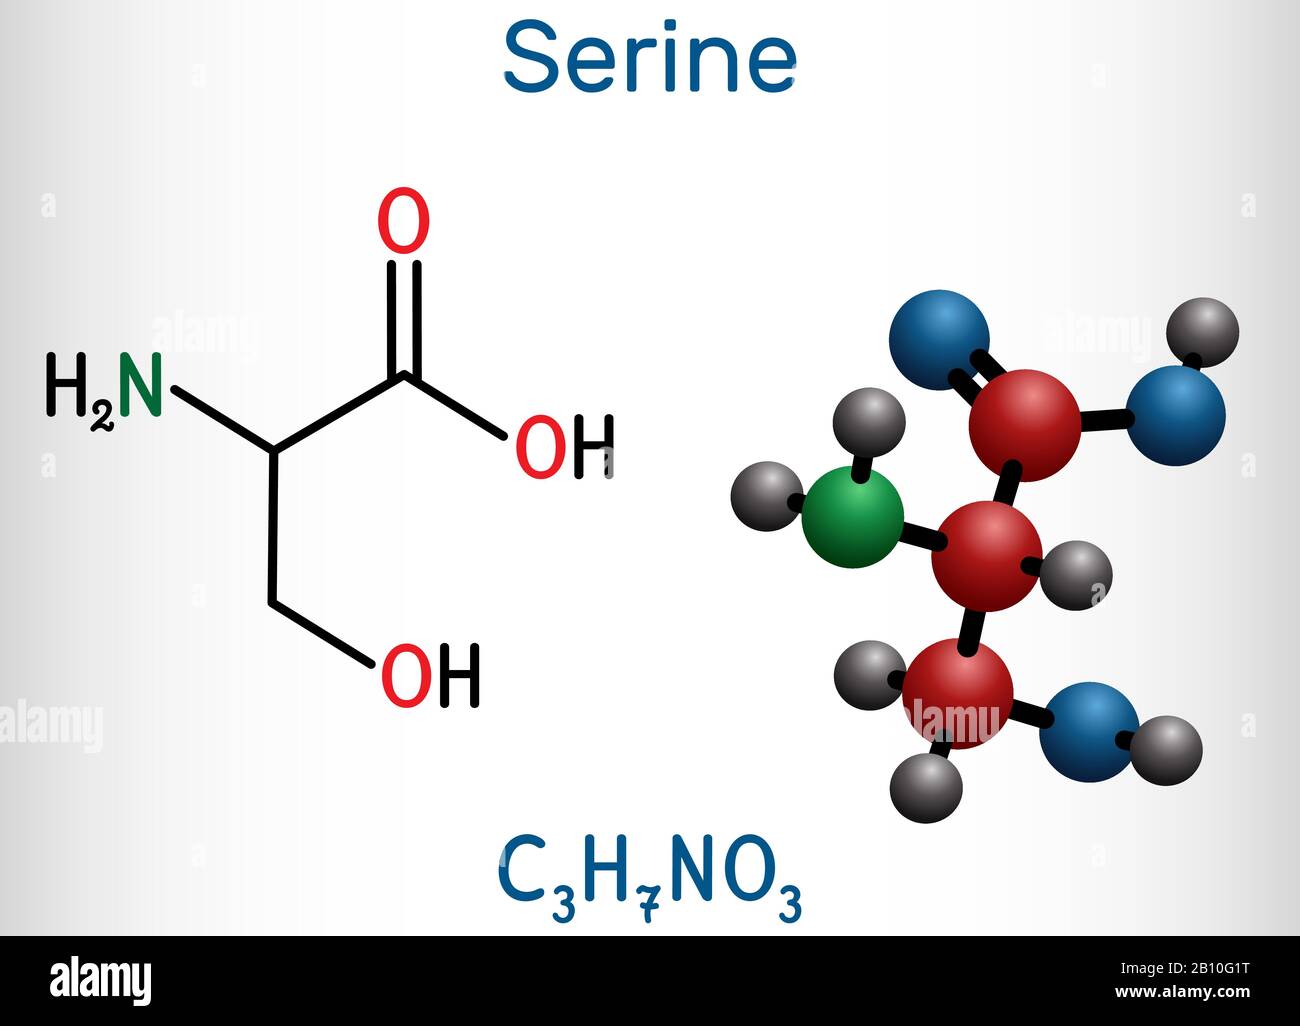 Serine, Ser amino acid molecule. It is used in the biosynthesis of protein. Structural chemical formula and molecule model. Vector illustration Stock Vector